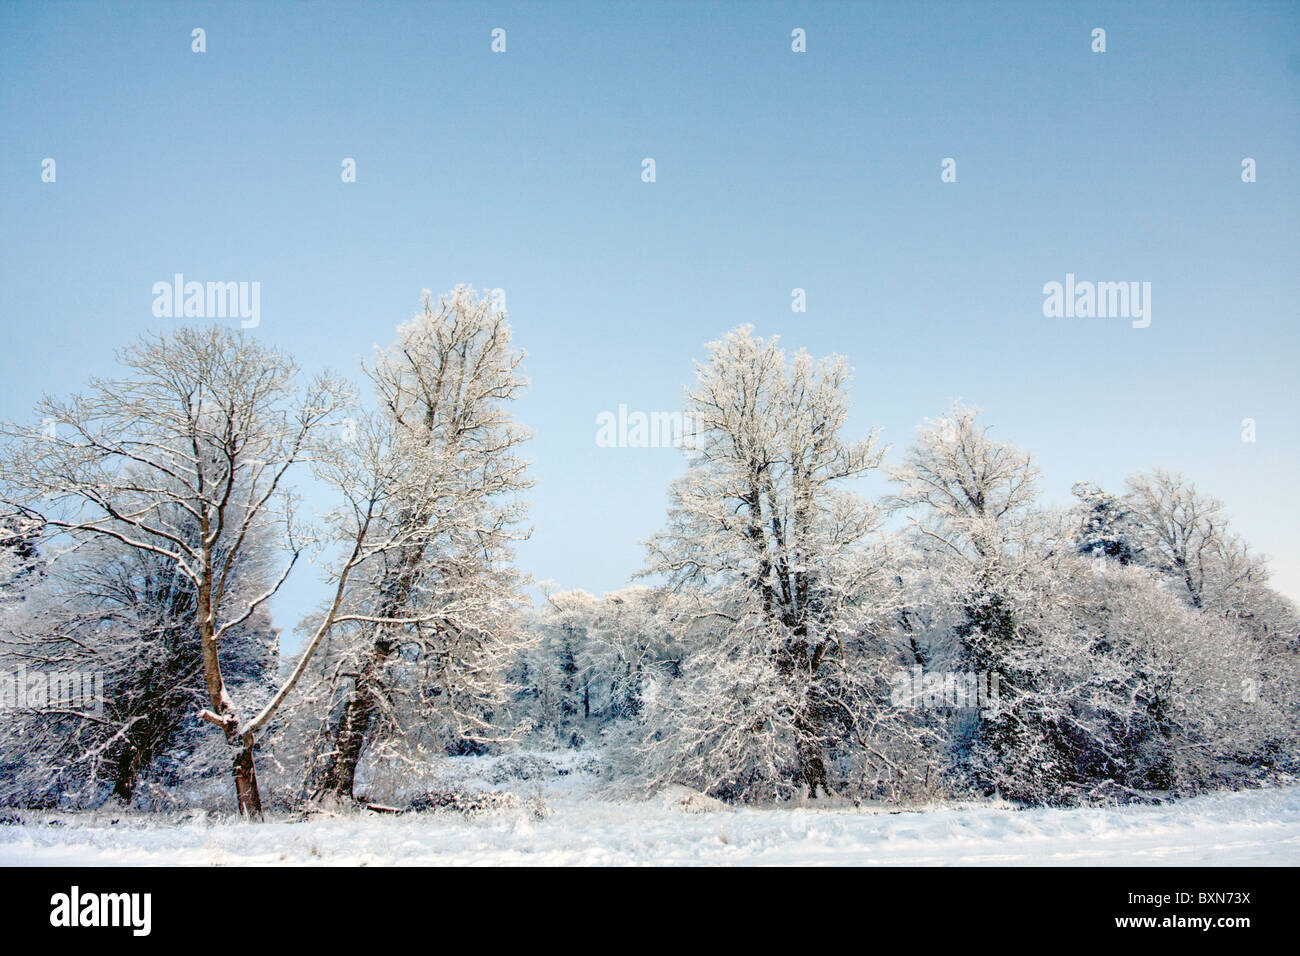 frozen snow sticking to trees in winter Stock Photo